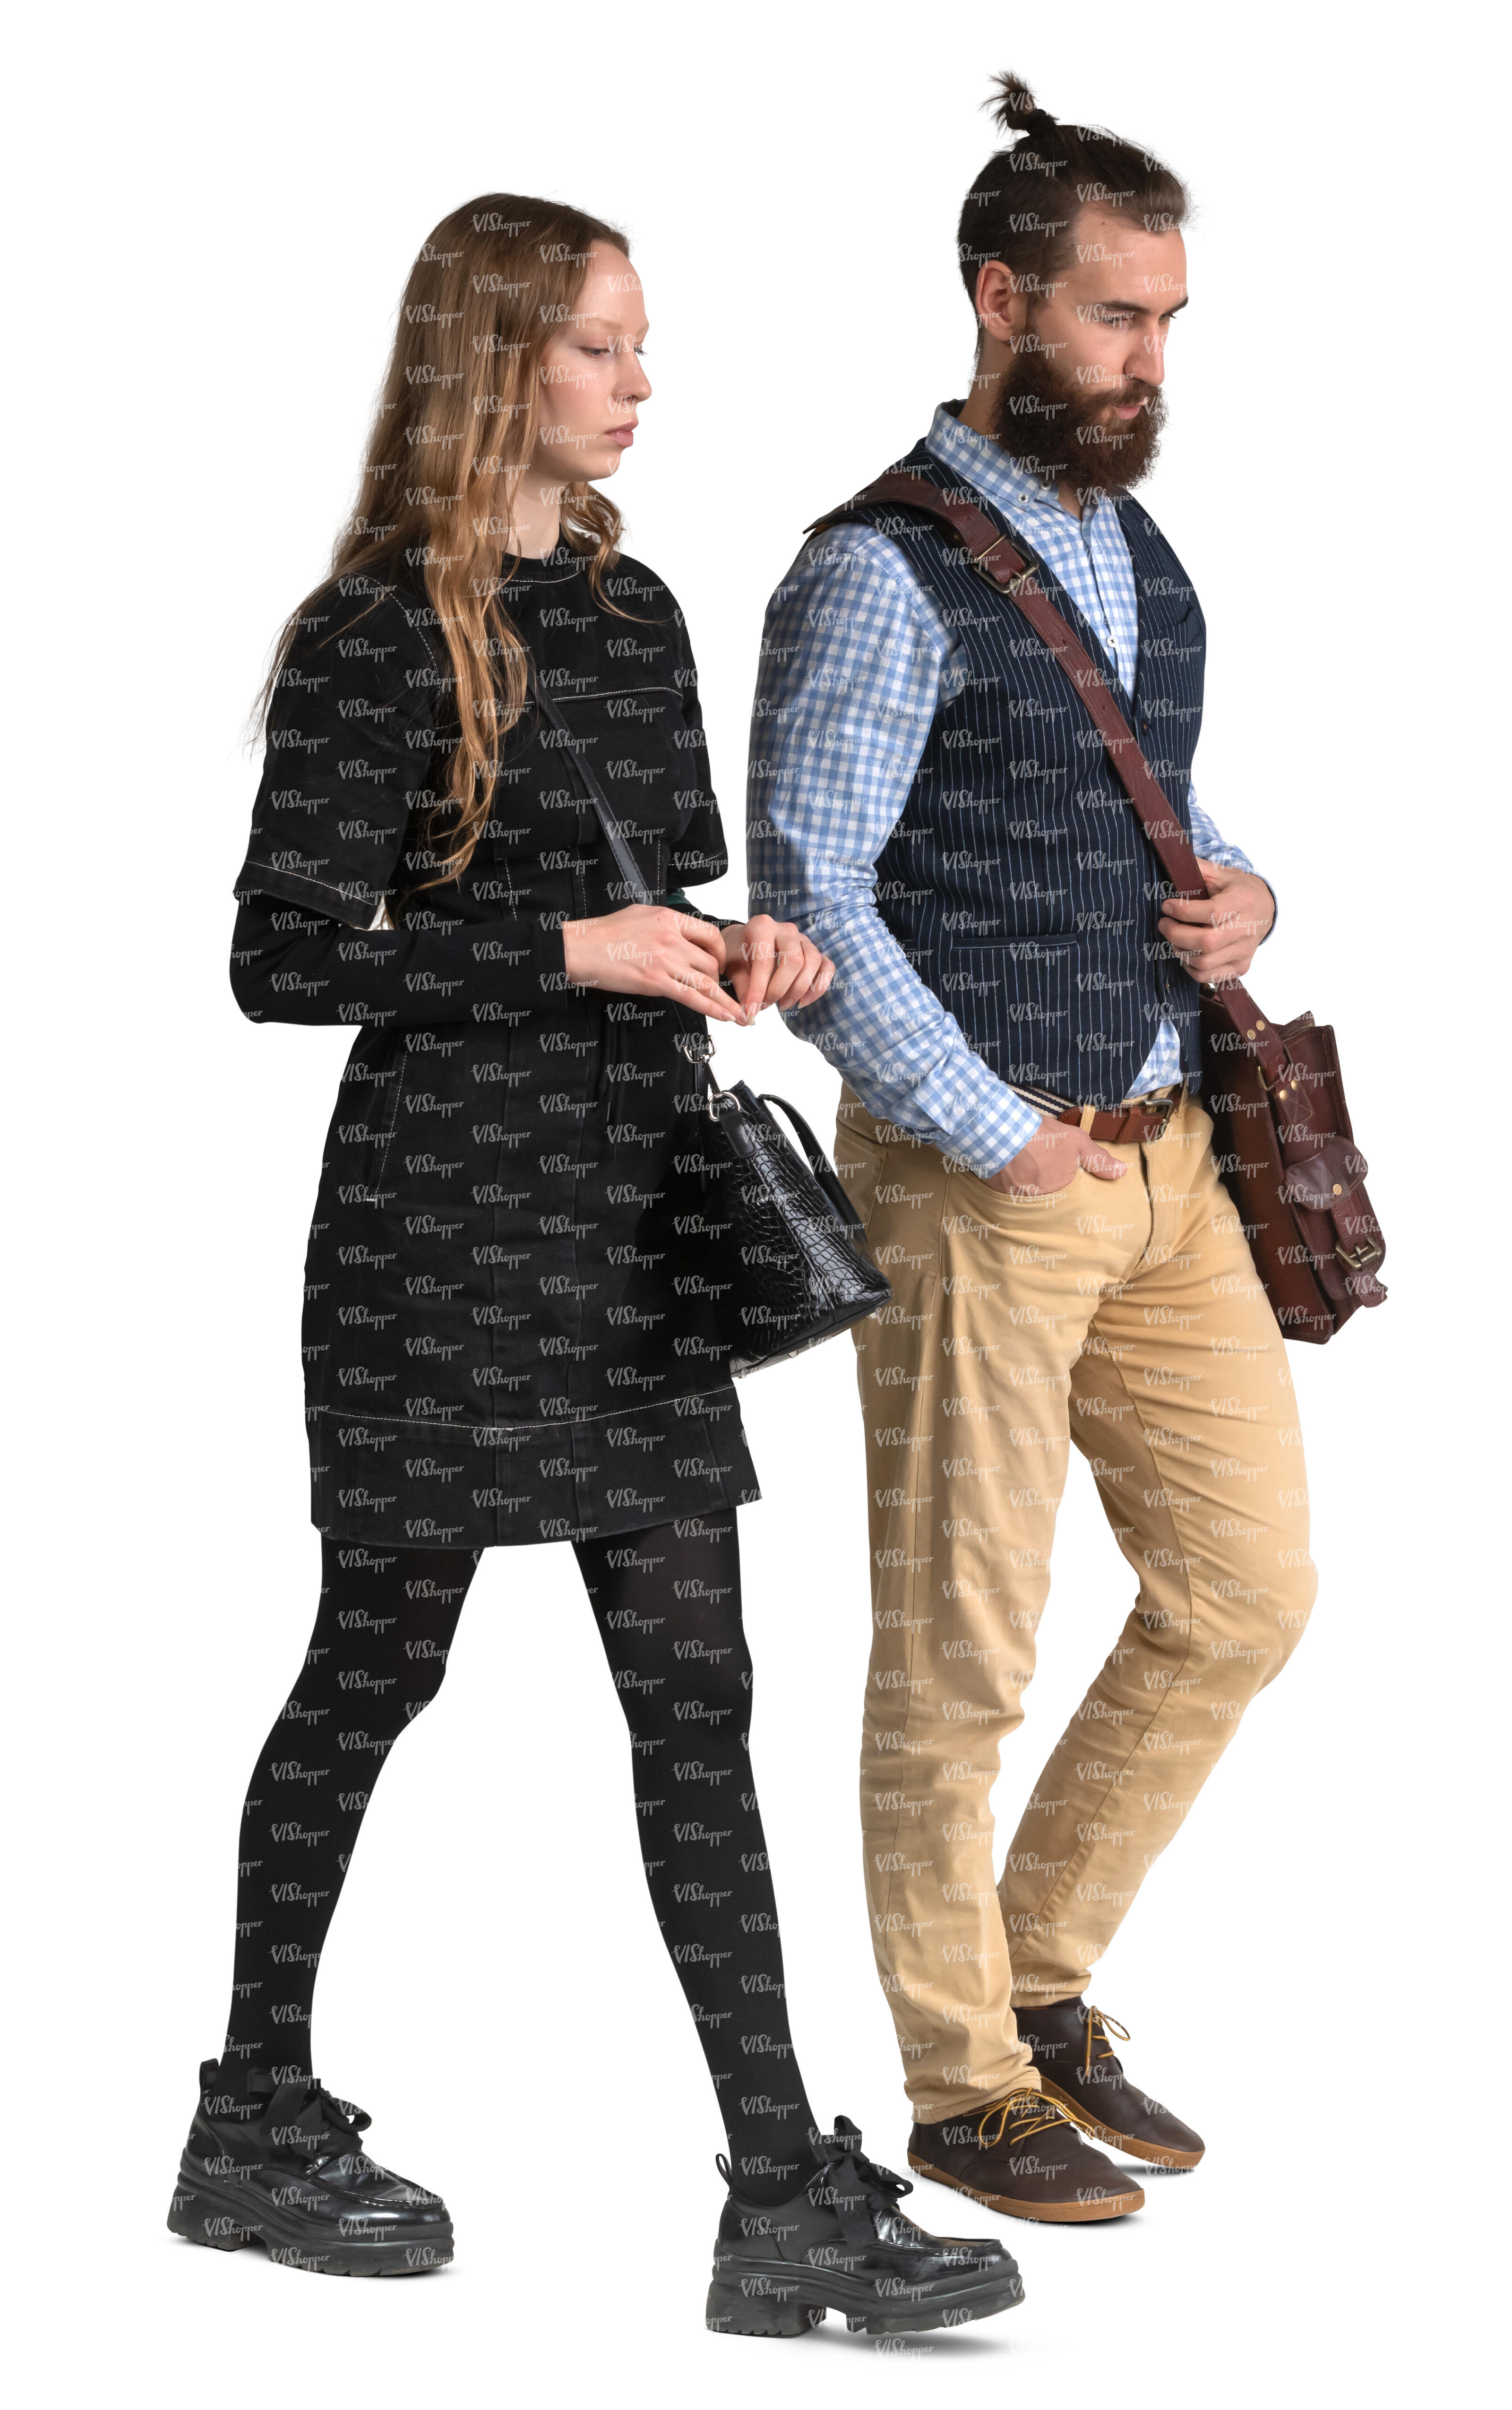 https://www.vishopper.com/images/products/maxxmax/PE/15963_man-and-woman-walking-together.jpg